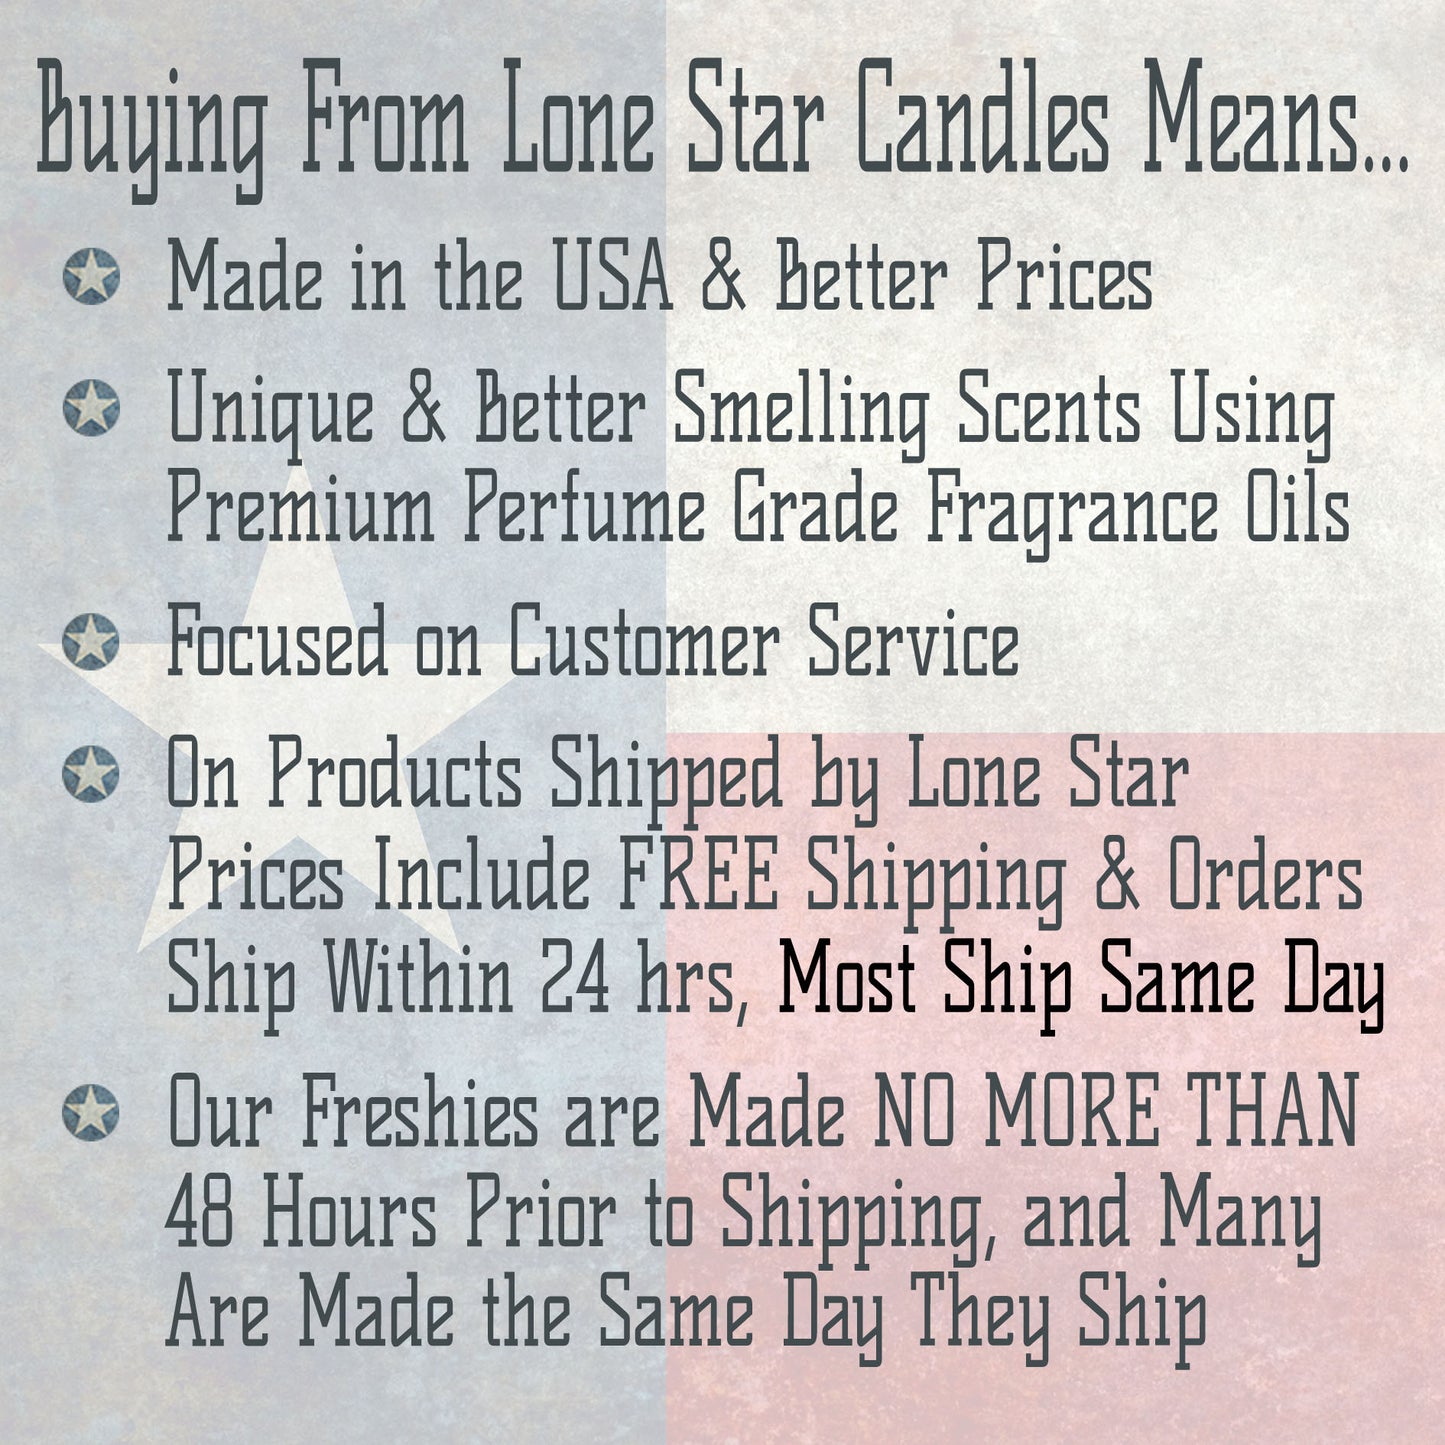 Strawberry Leather, Lone Star Candles & More's Premium Strongly Scented Freshies, Genuine Leather Aroma with Sweet & Juicy Strawberries, Car & Air Freshener, USA & Texas Made, Pig 1-Pack